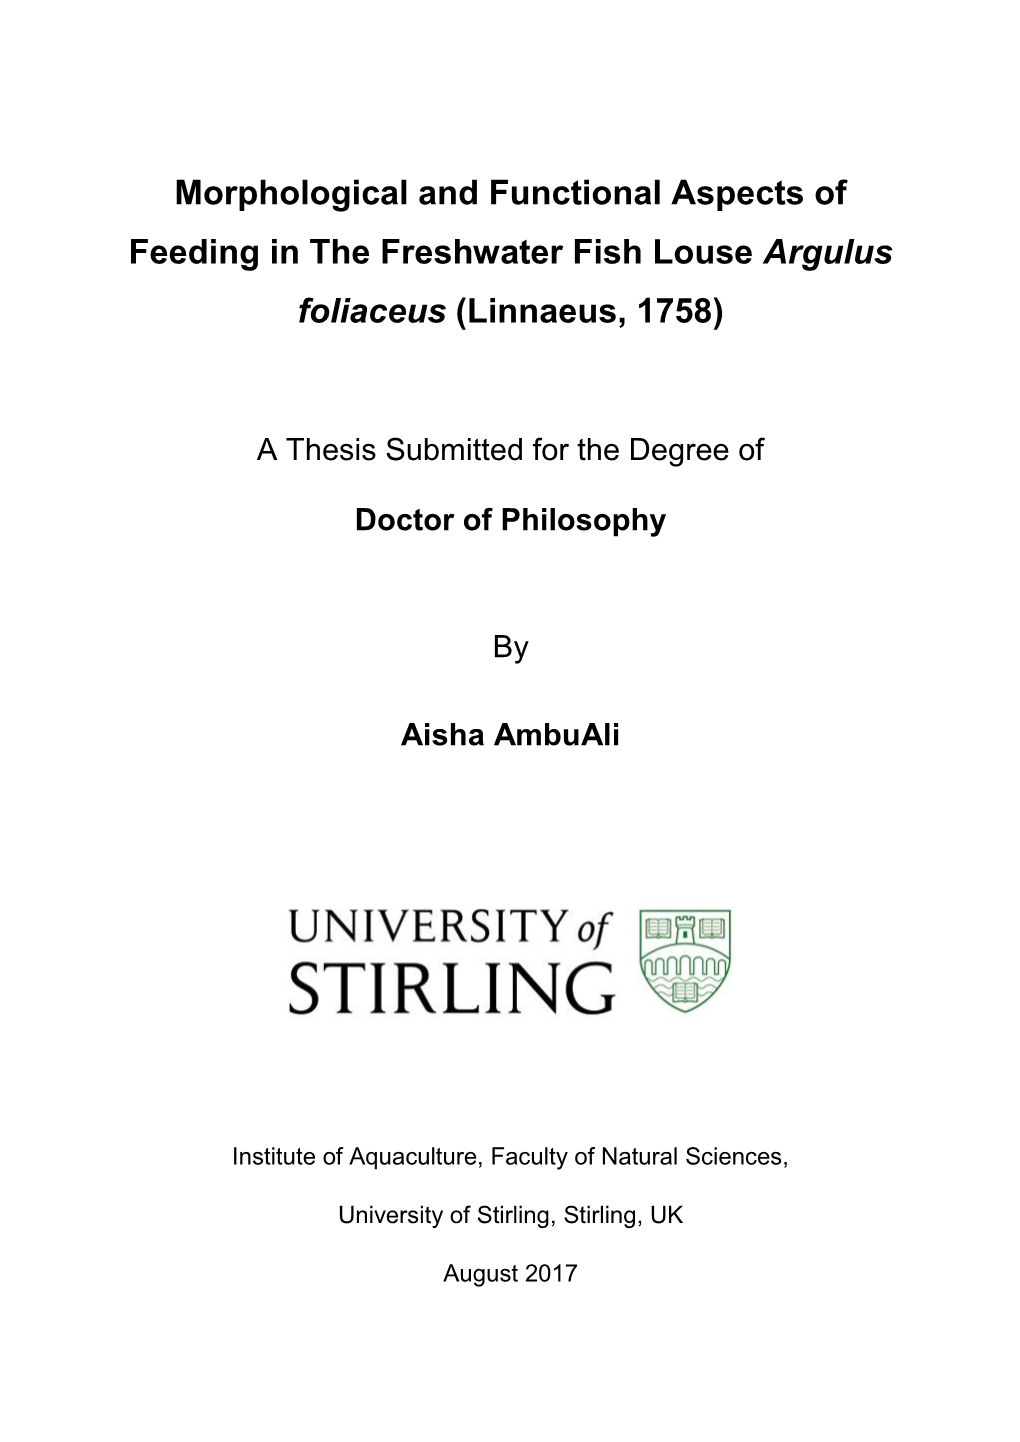 Morphological and Functional Aspects of Feeding in the Freshwater Fish Louse Argulus Foliaceus (Linnaeus, 1758)